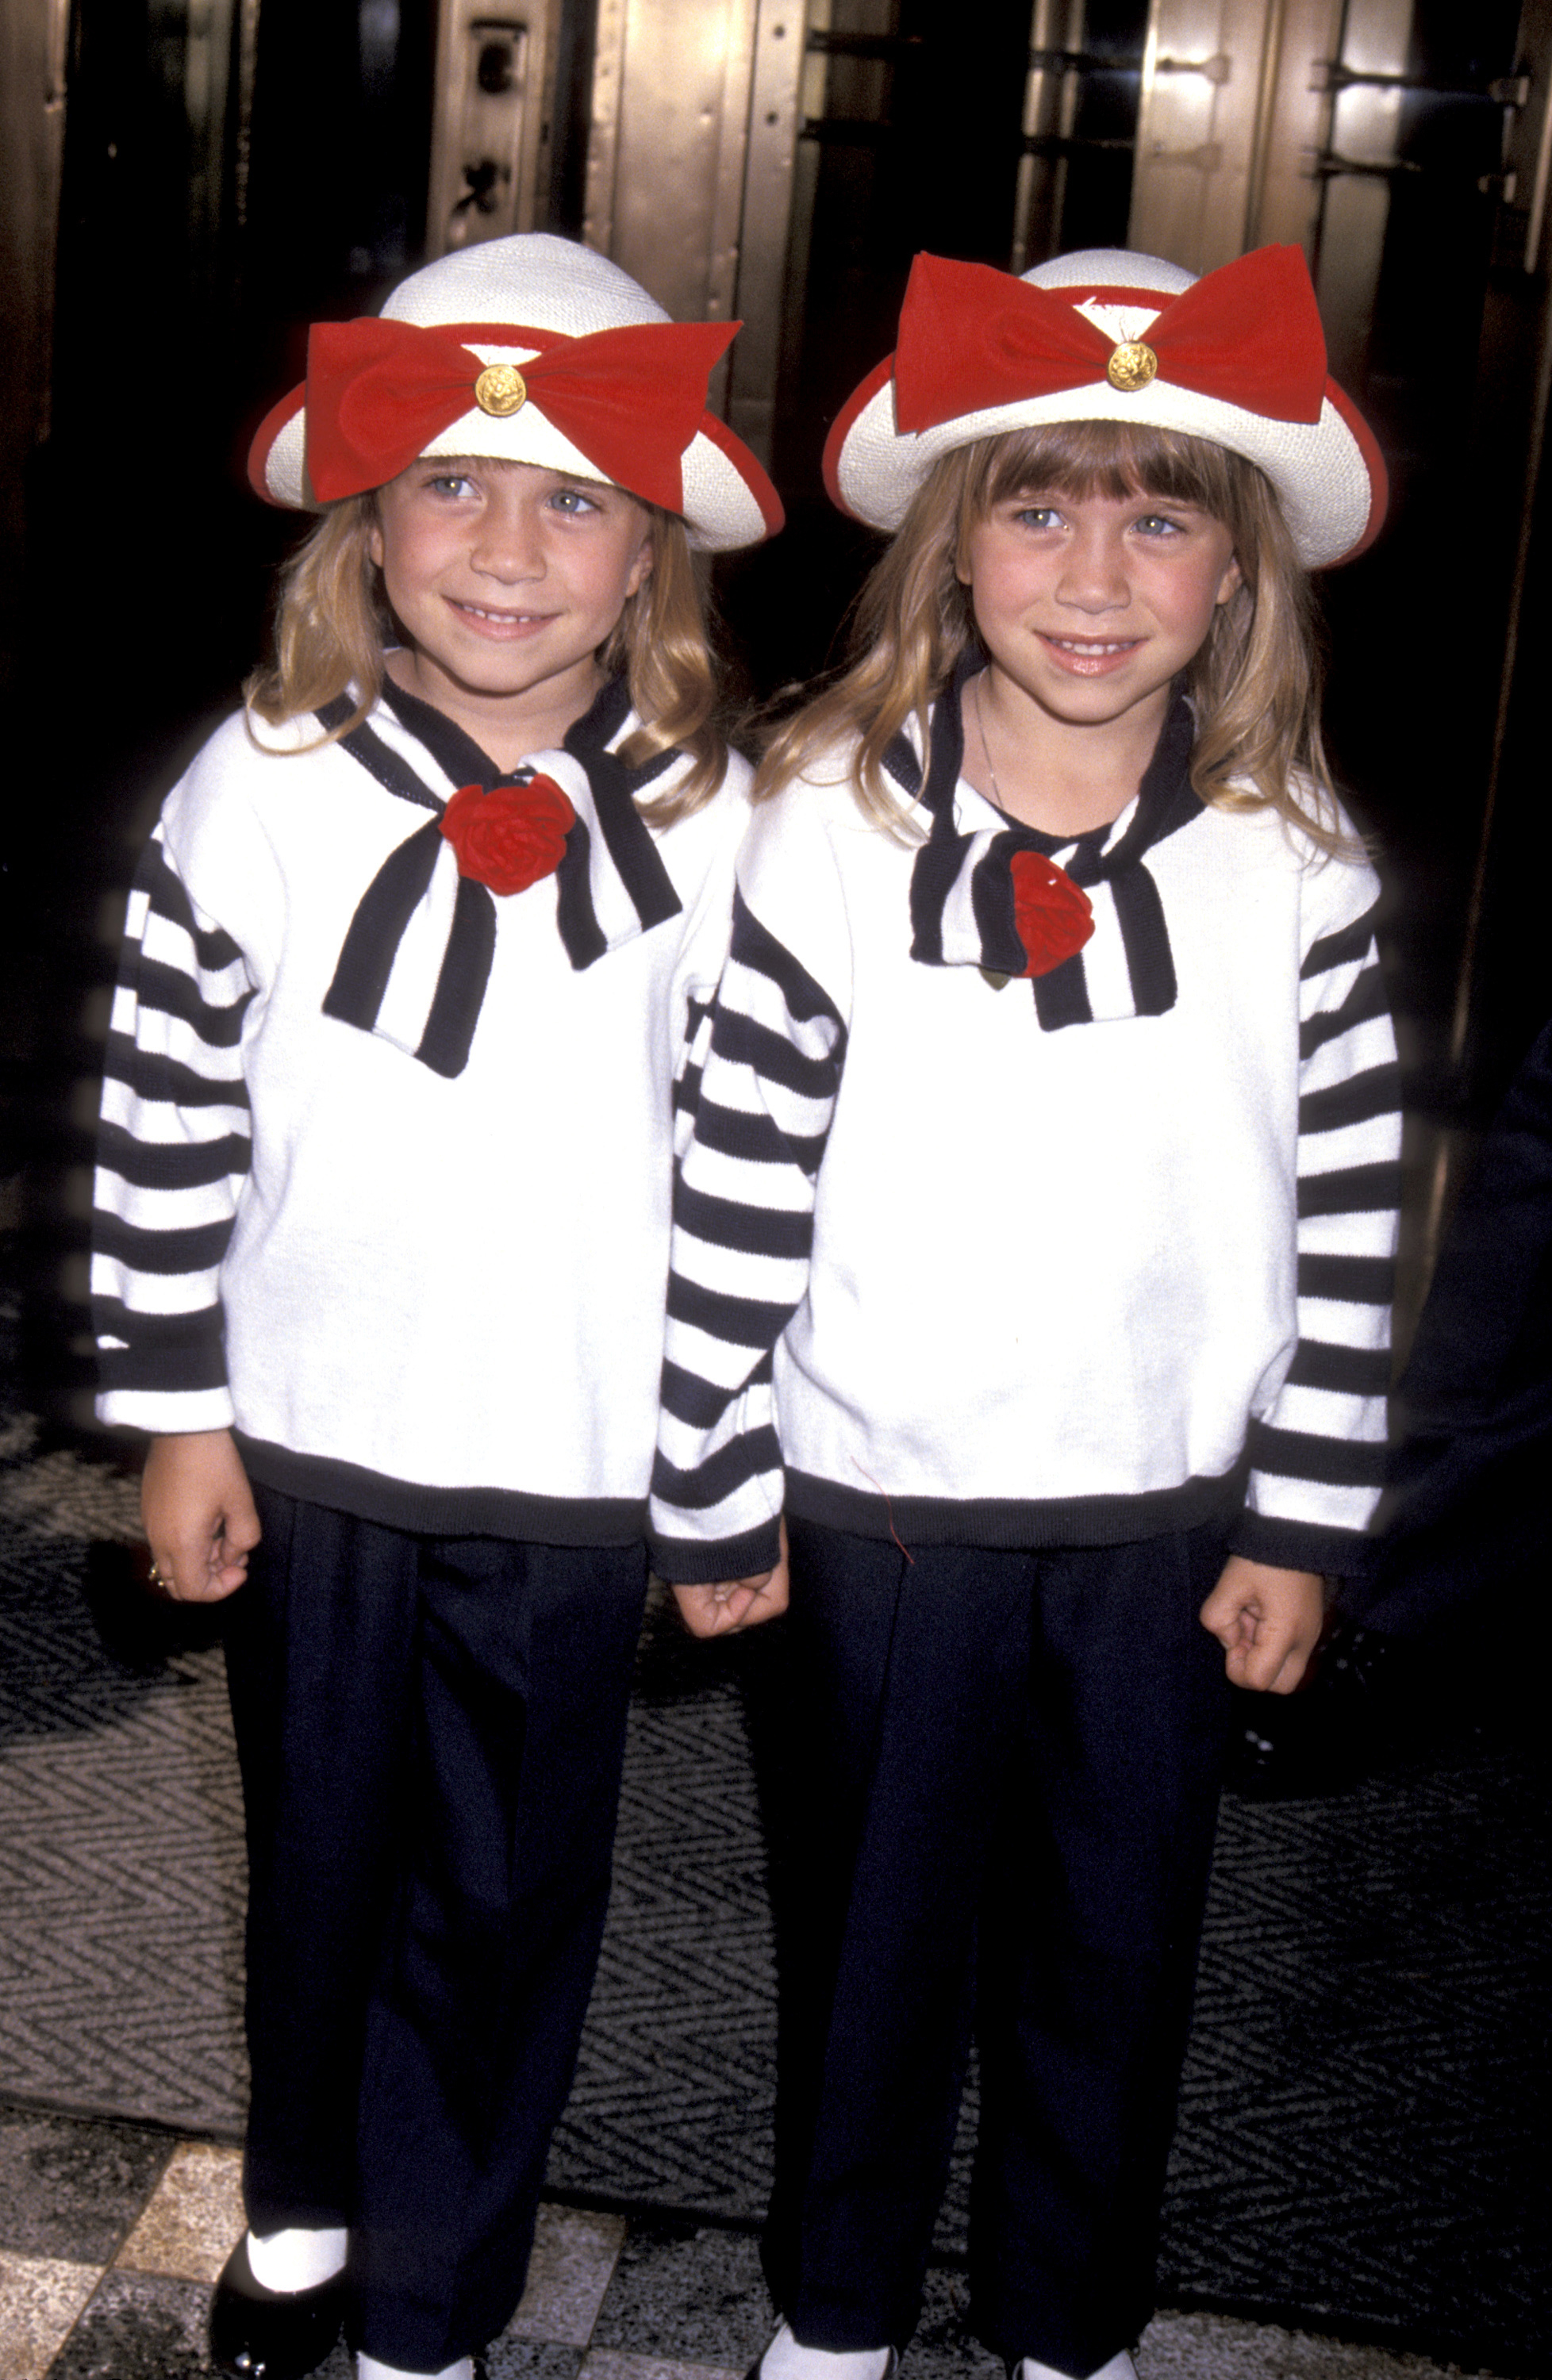 Mary-Kate and Ashley in matching sailor-type outfits and large hats with bows